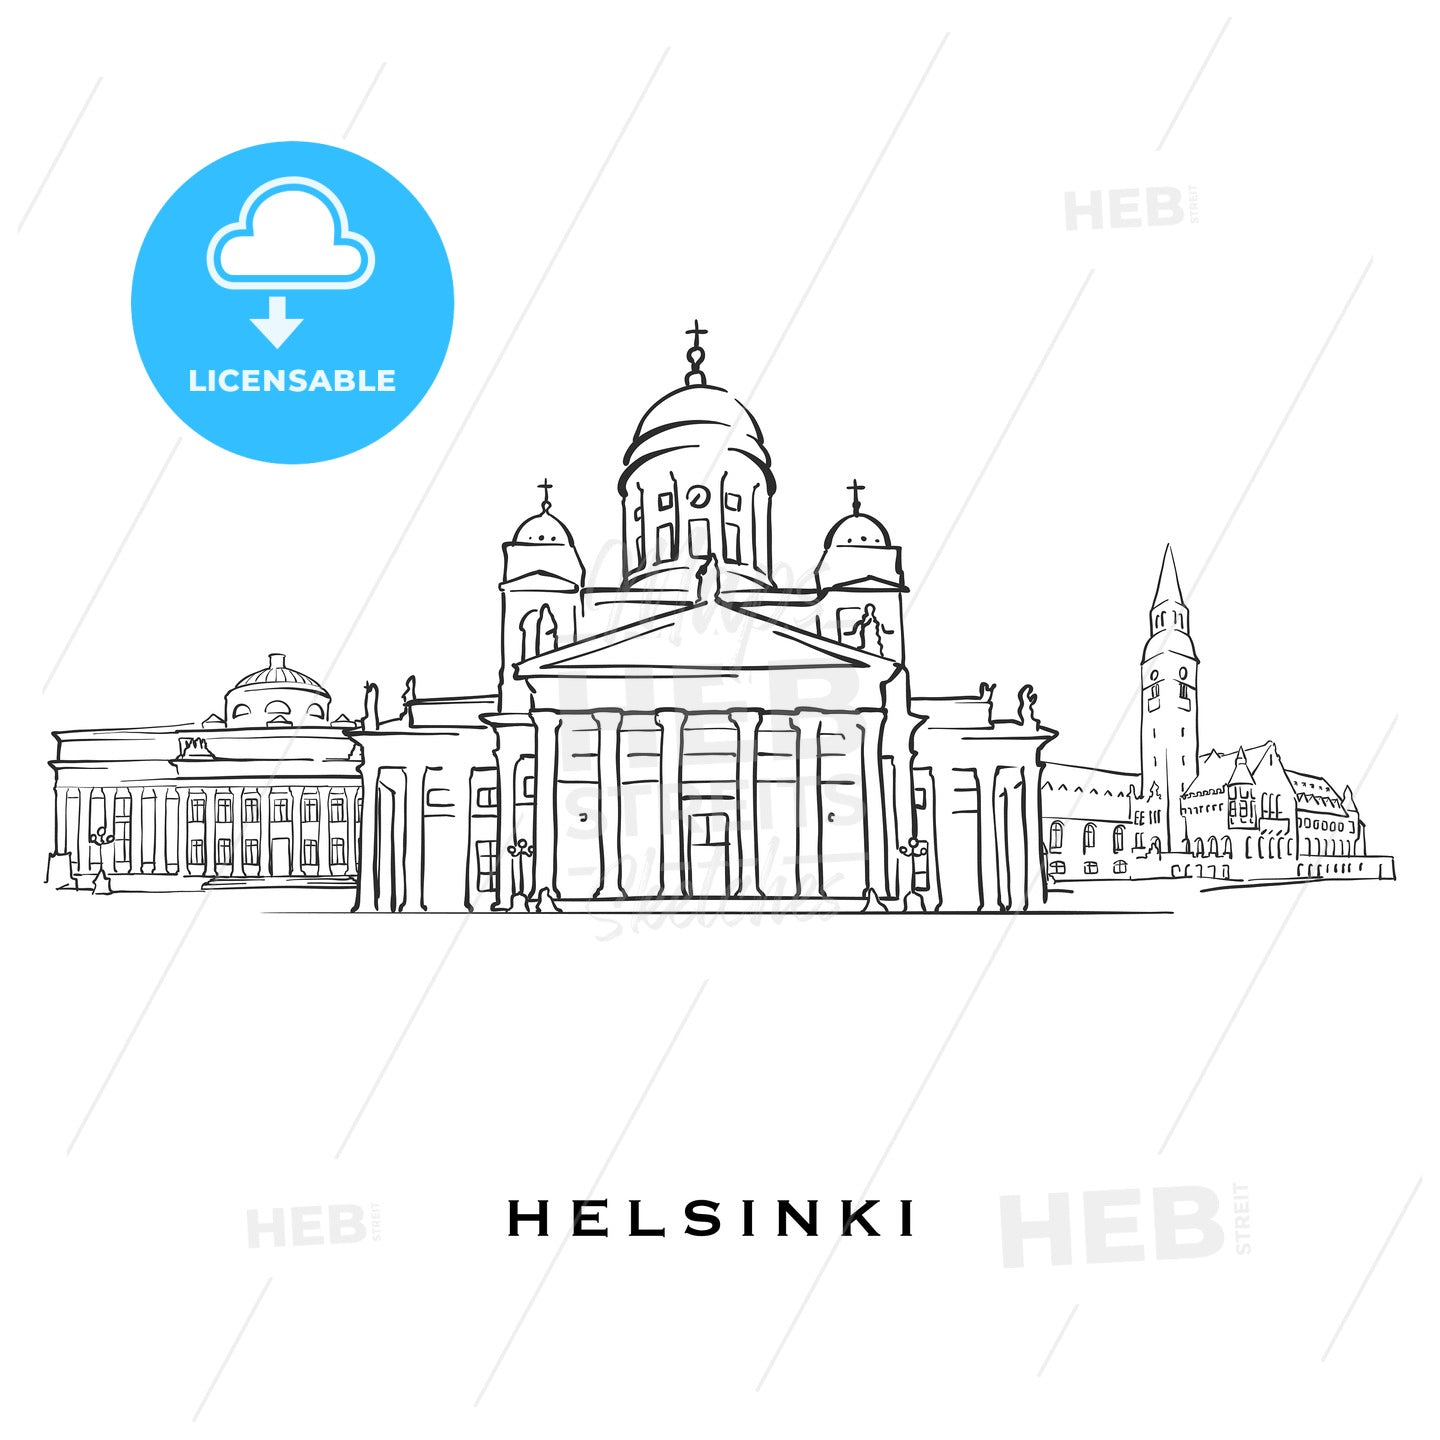 Helsinki Finland famous architecture – instant download